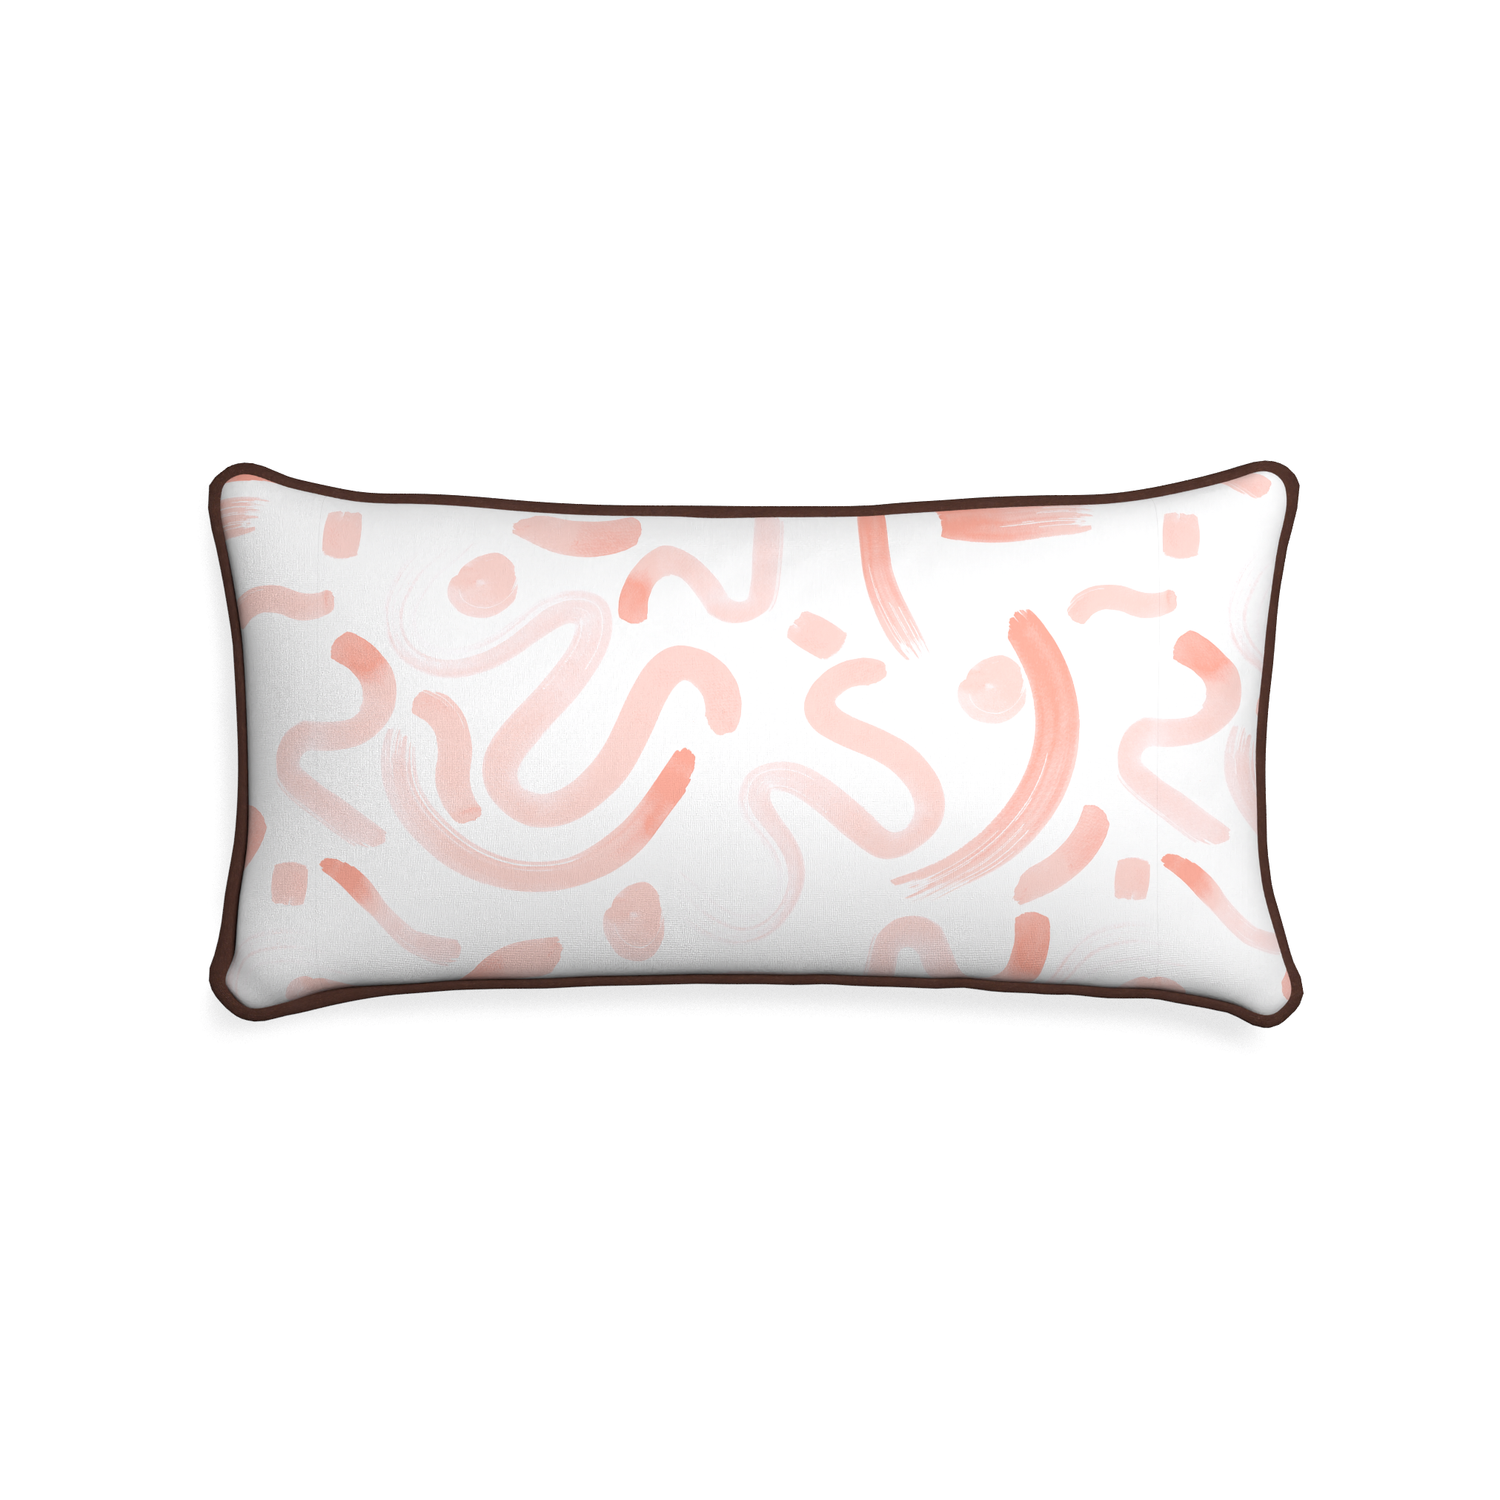 Midi-lumbar hockney pink custom pink graphicpillow with w piping on white background